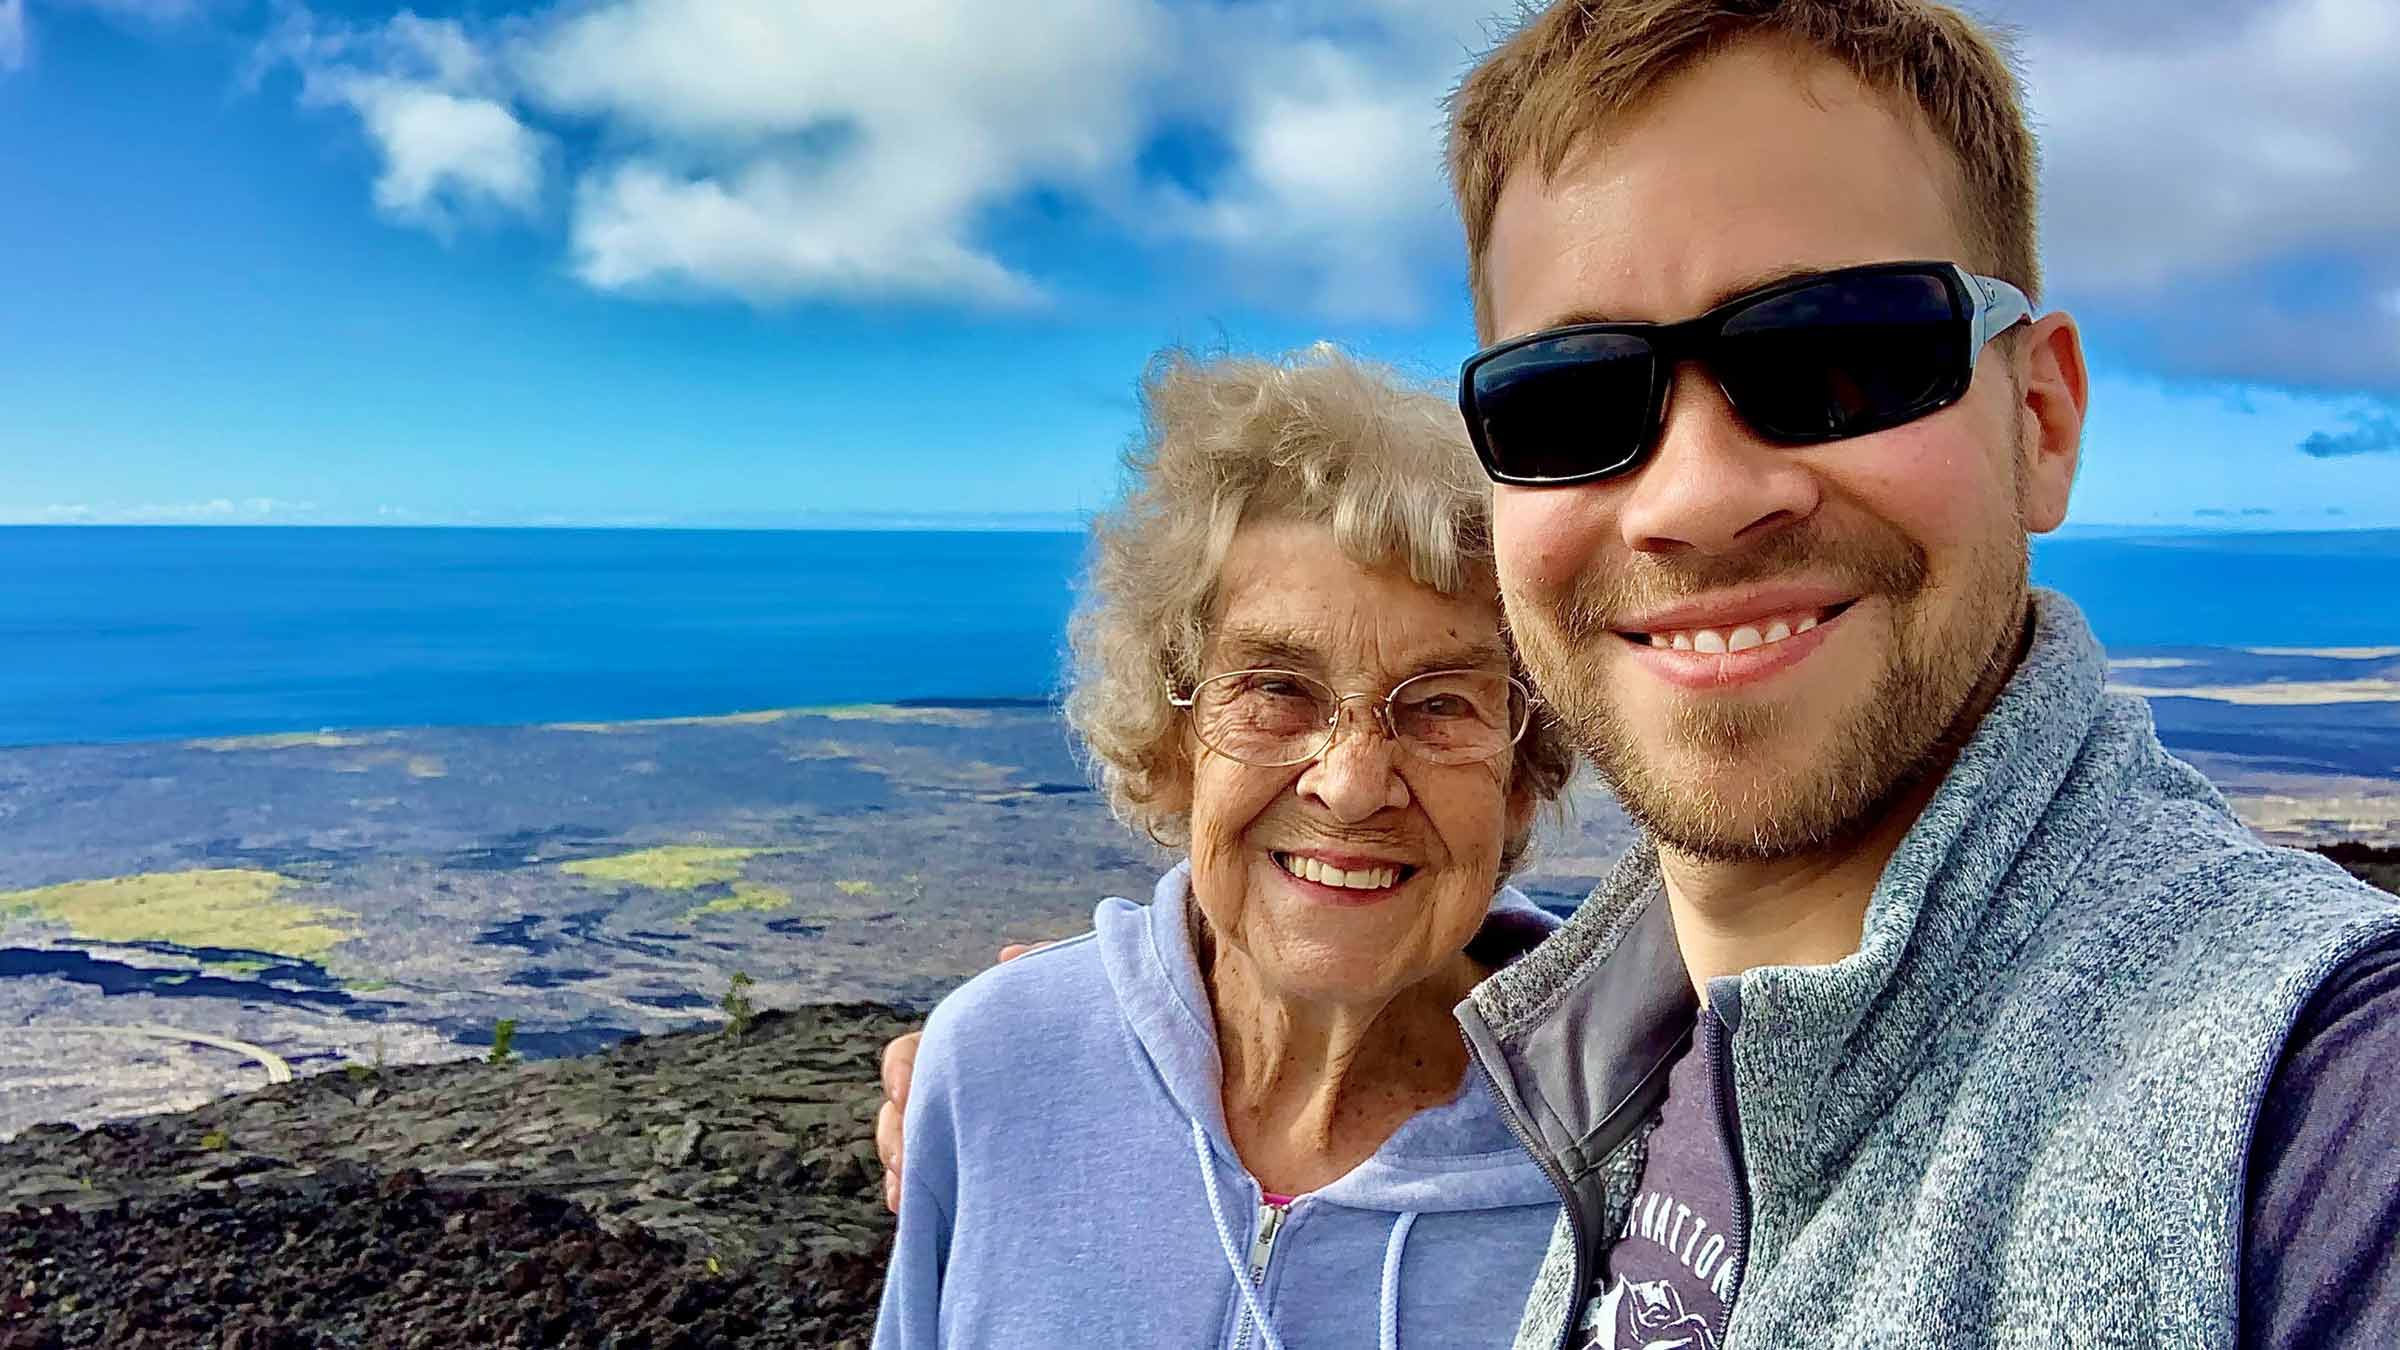 Brad Ryan and his grandmother on top of the mountain with a view of the ocean